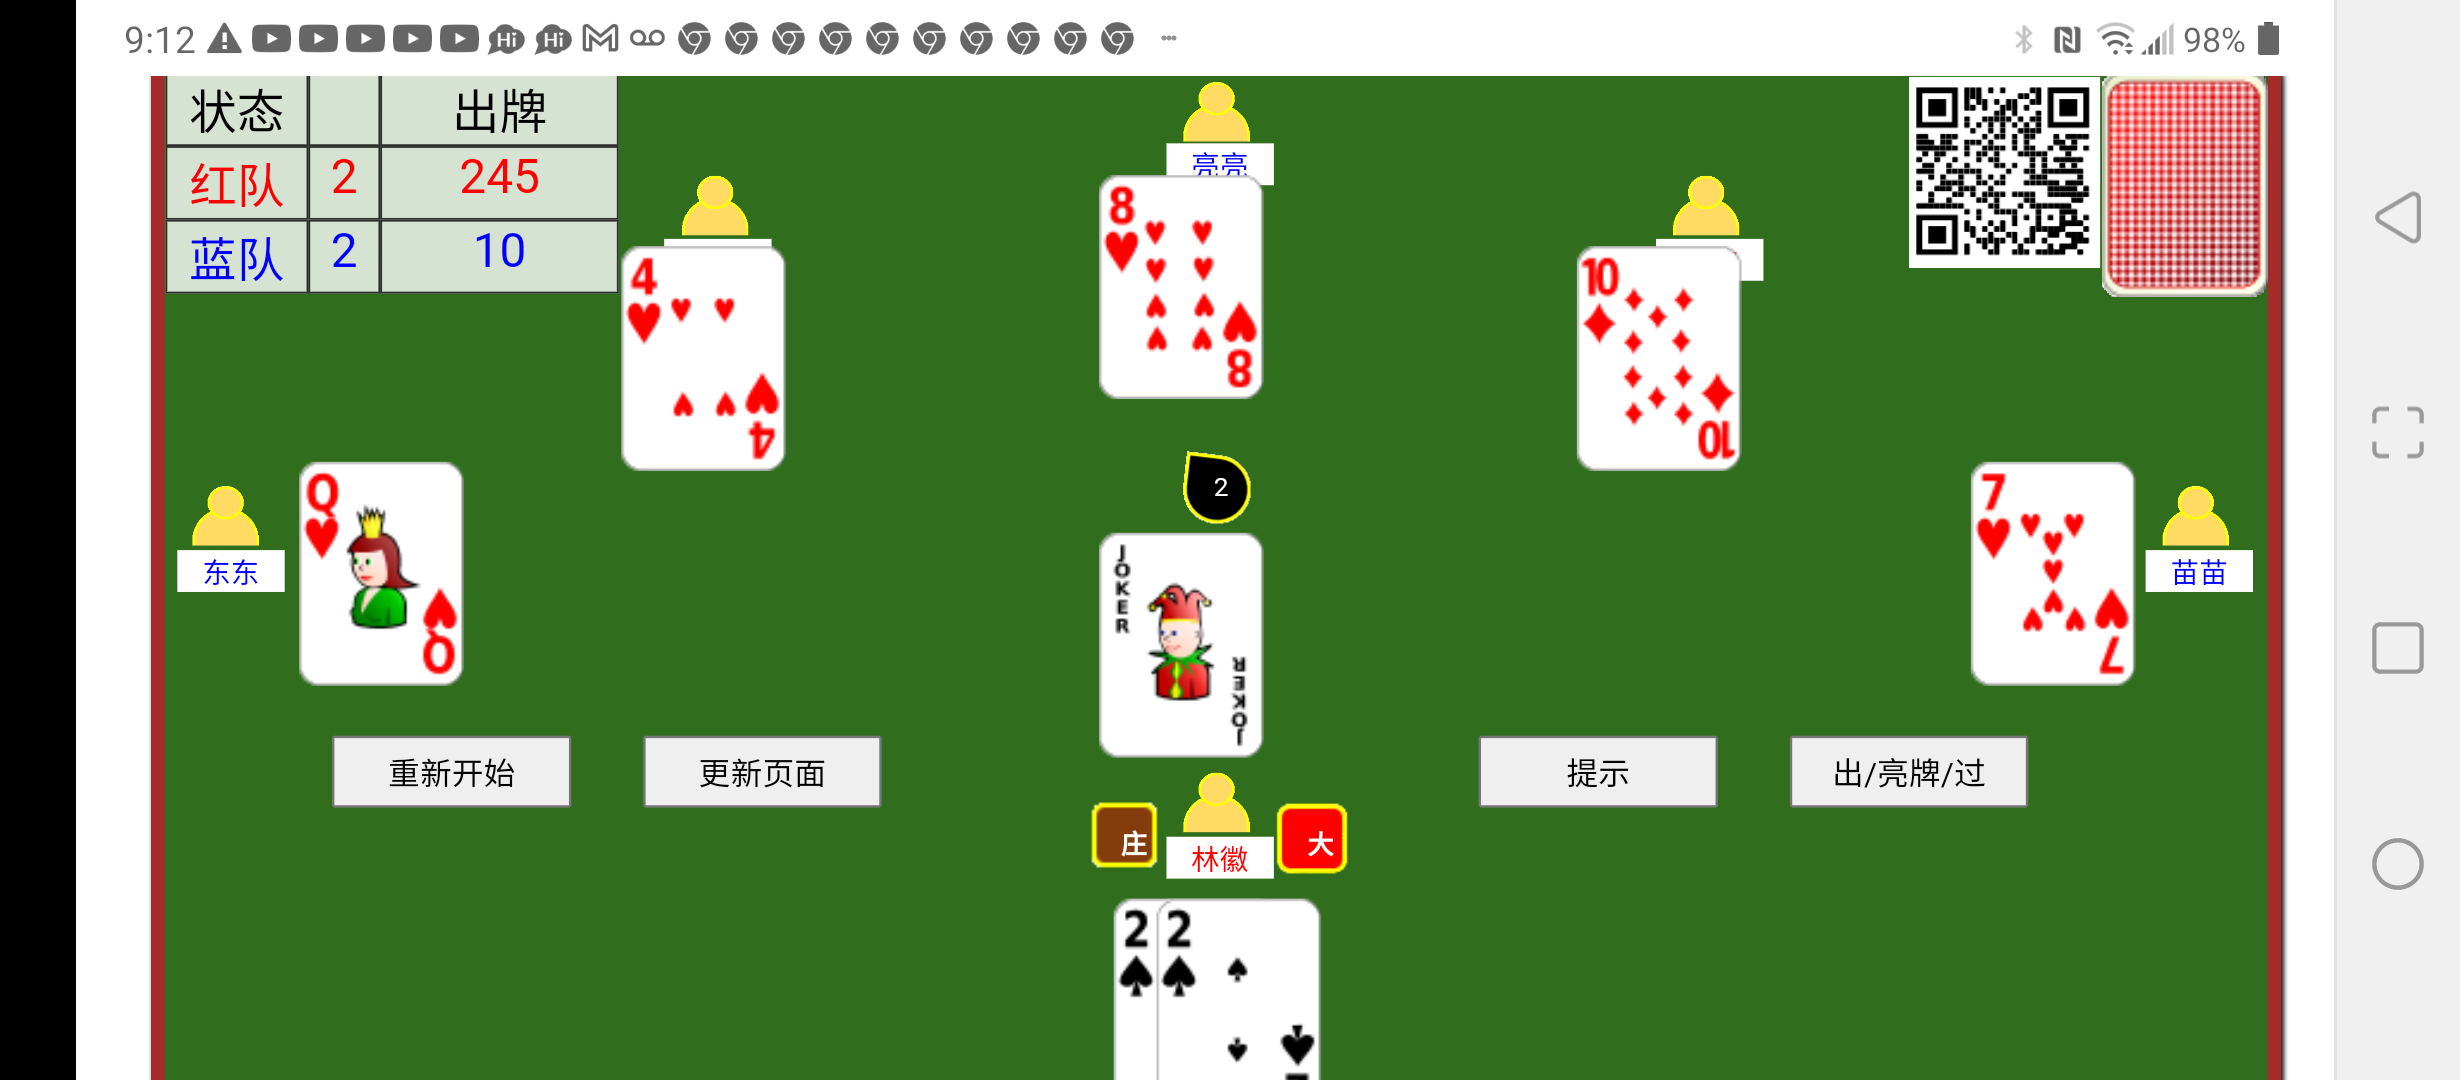 html5 tractor card game Screenshot_20220116-091253.png